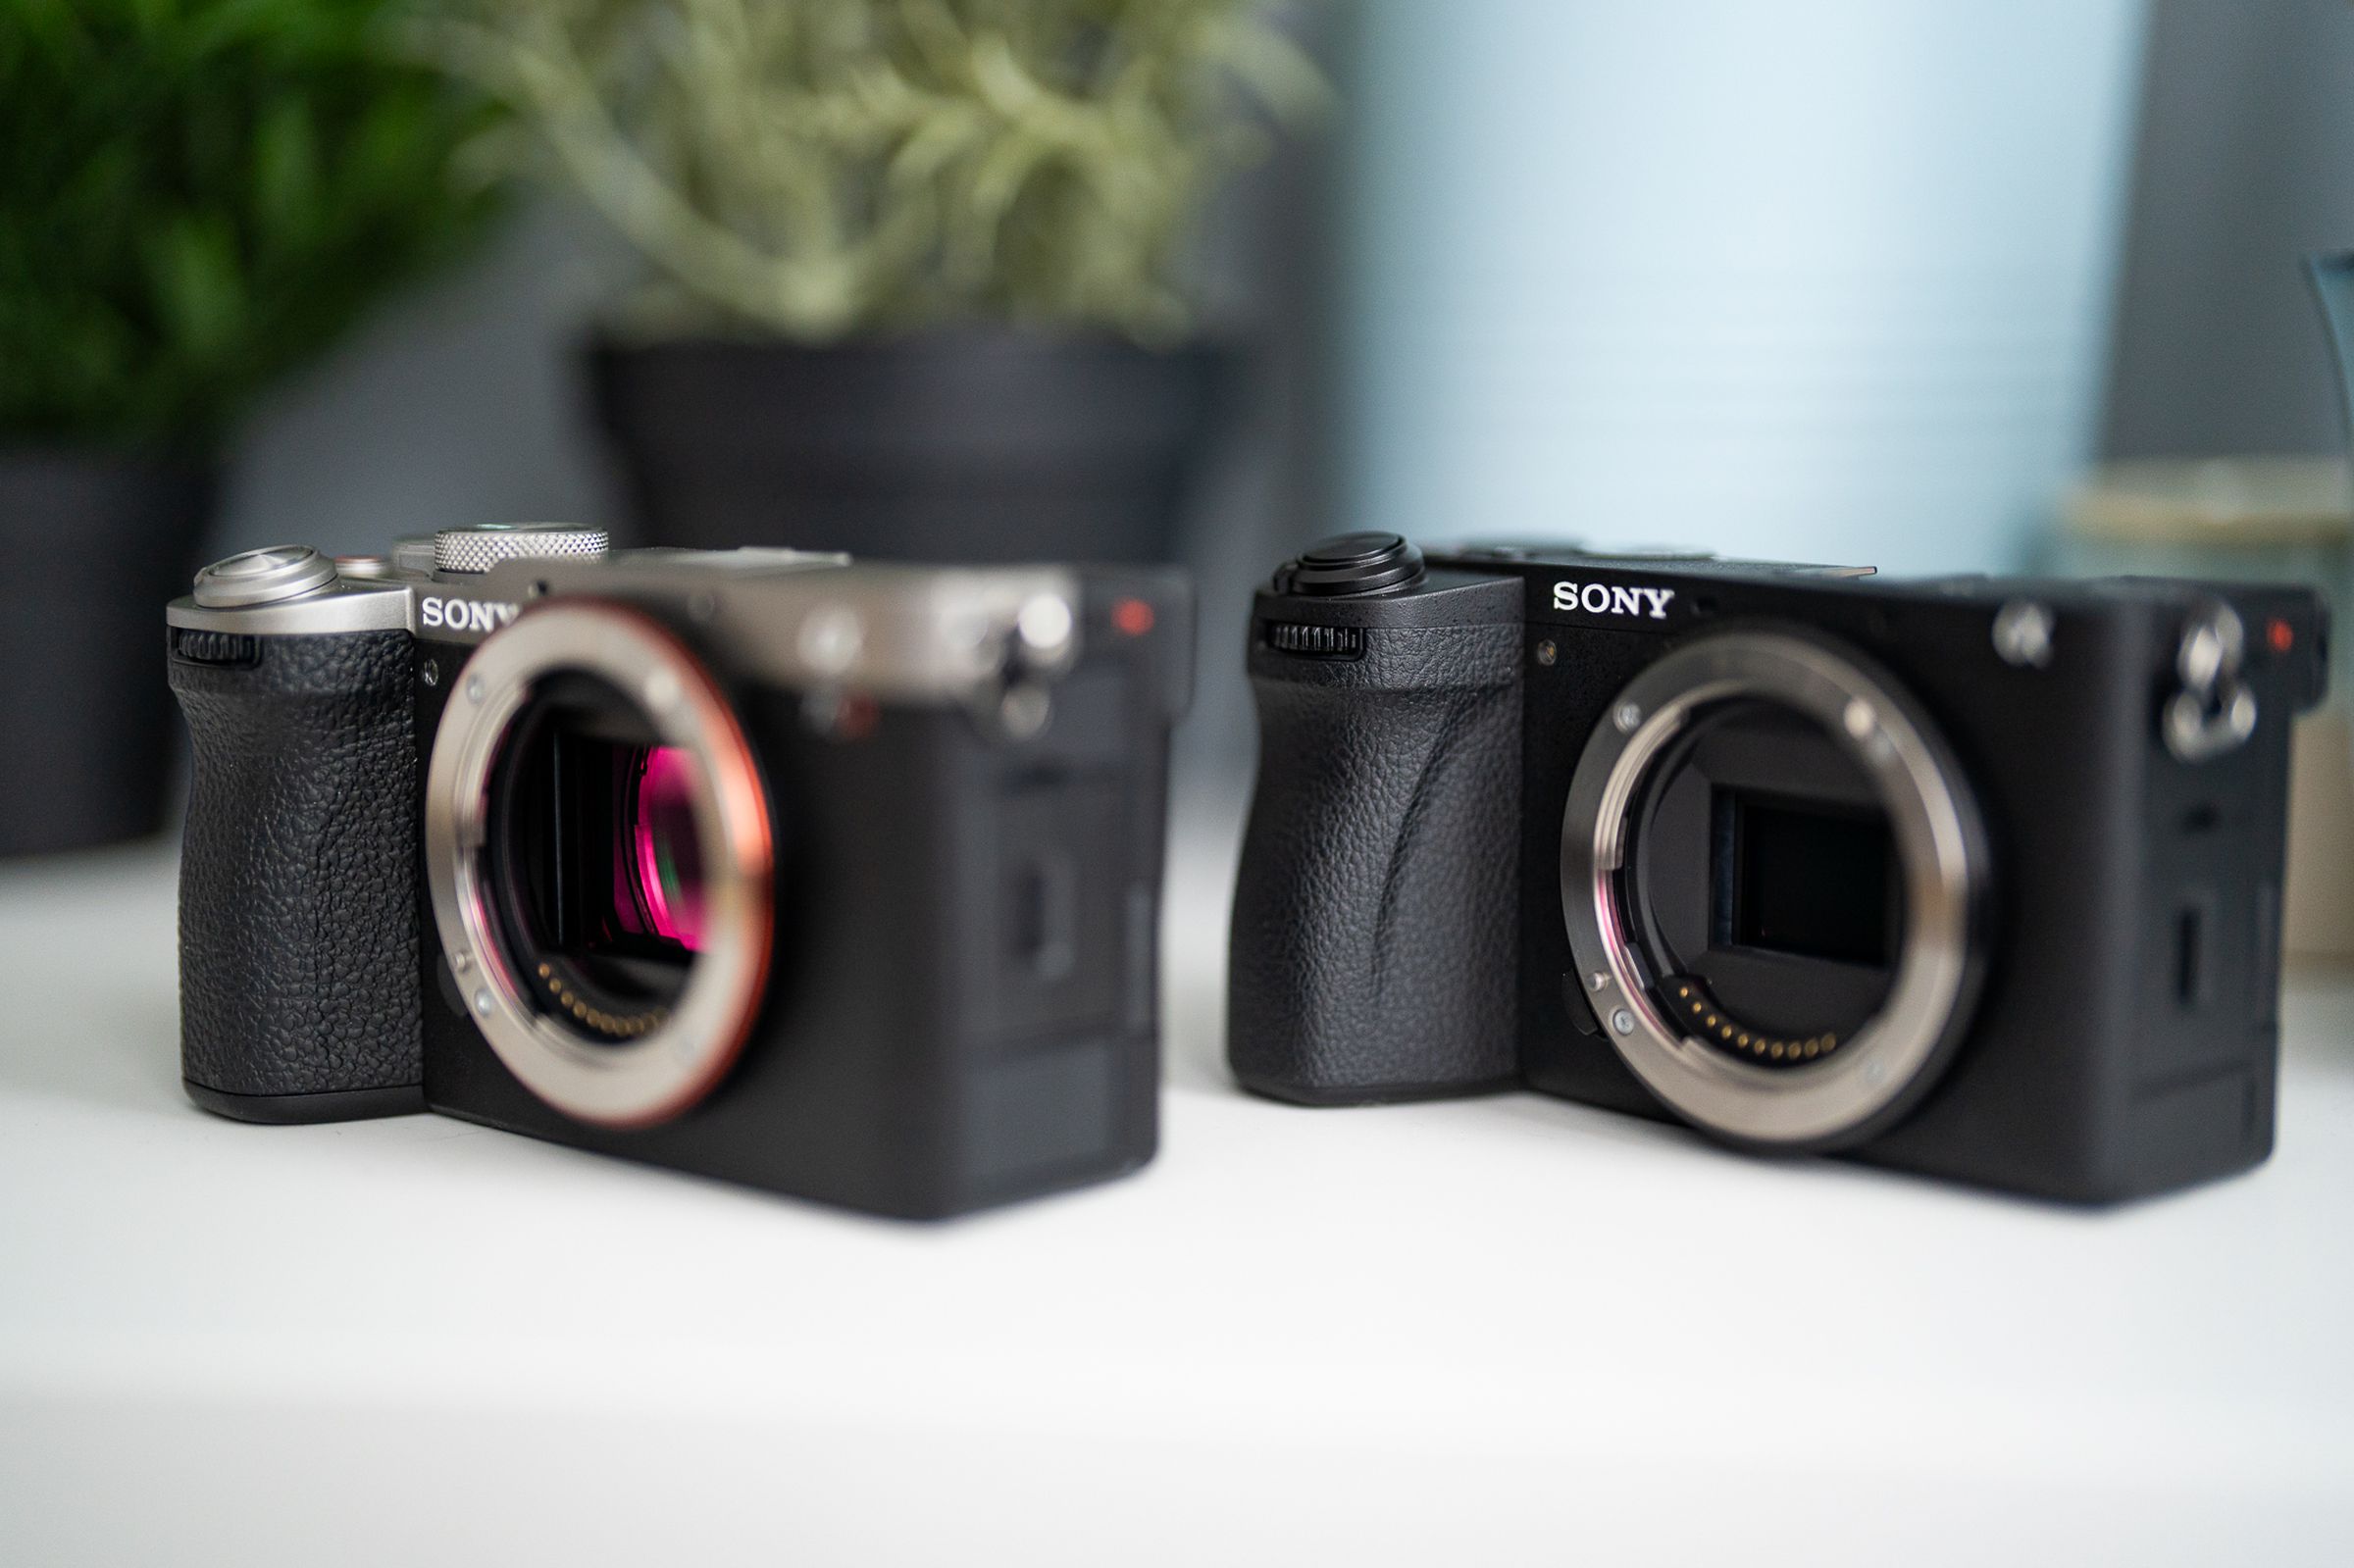 <em>You can see how the smaller A6700 (right) actually has the larger grip with better ergonomics than the A7C R / A7C II.</em>